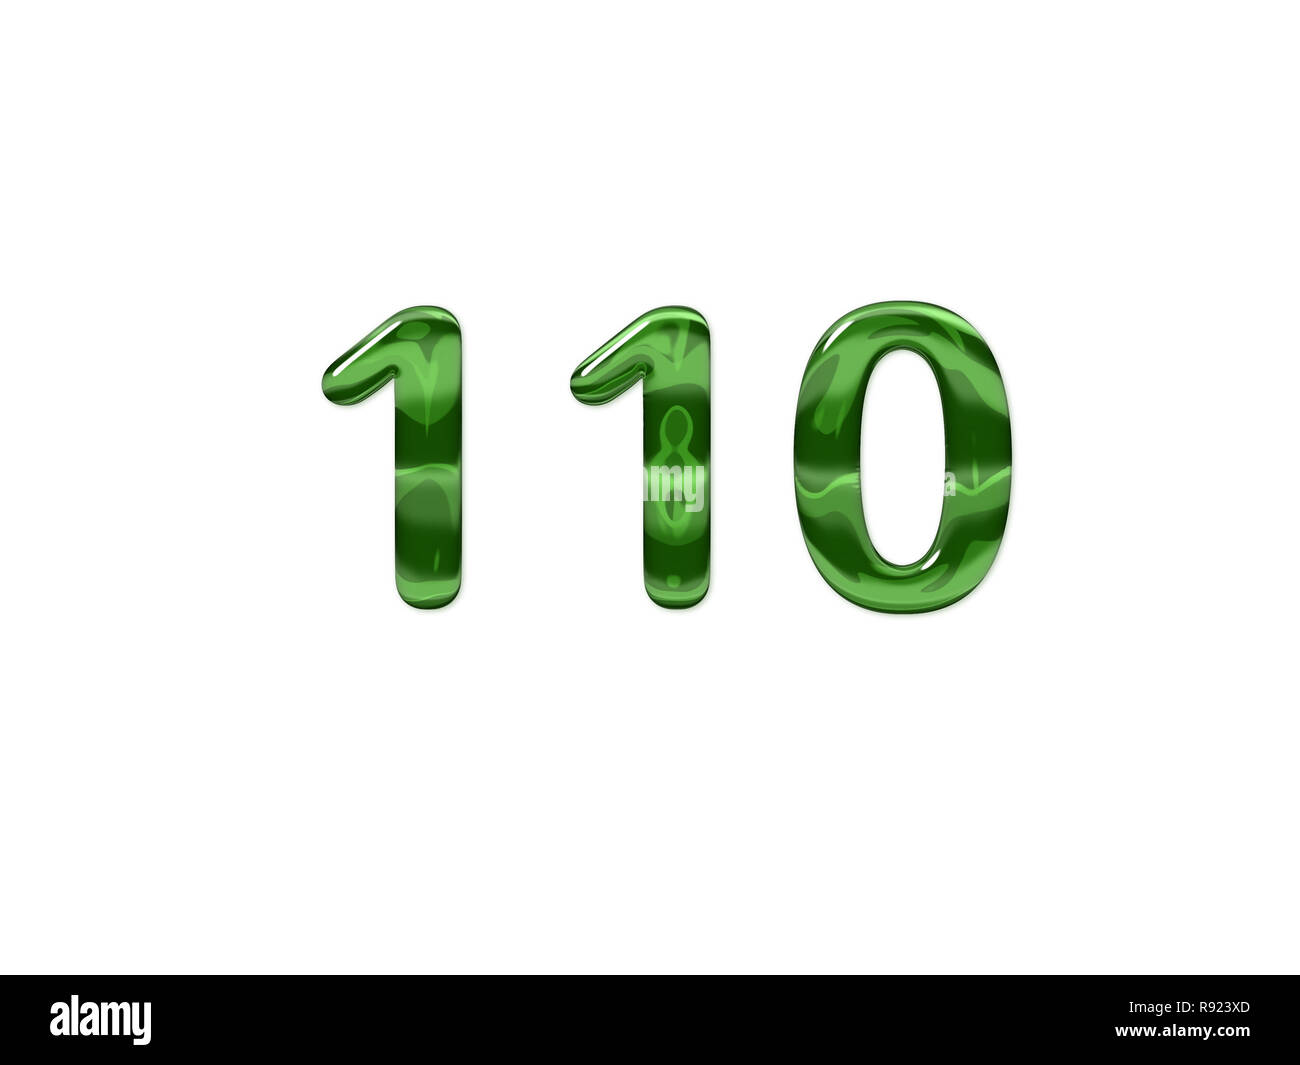 Green Number 110 isolated white background Stock Photo - Alamy